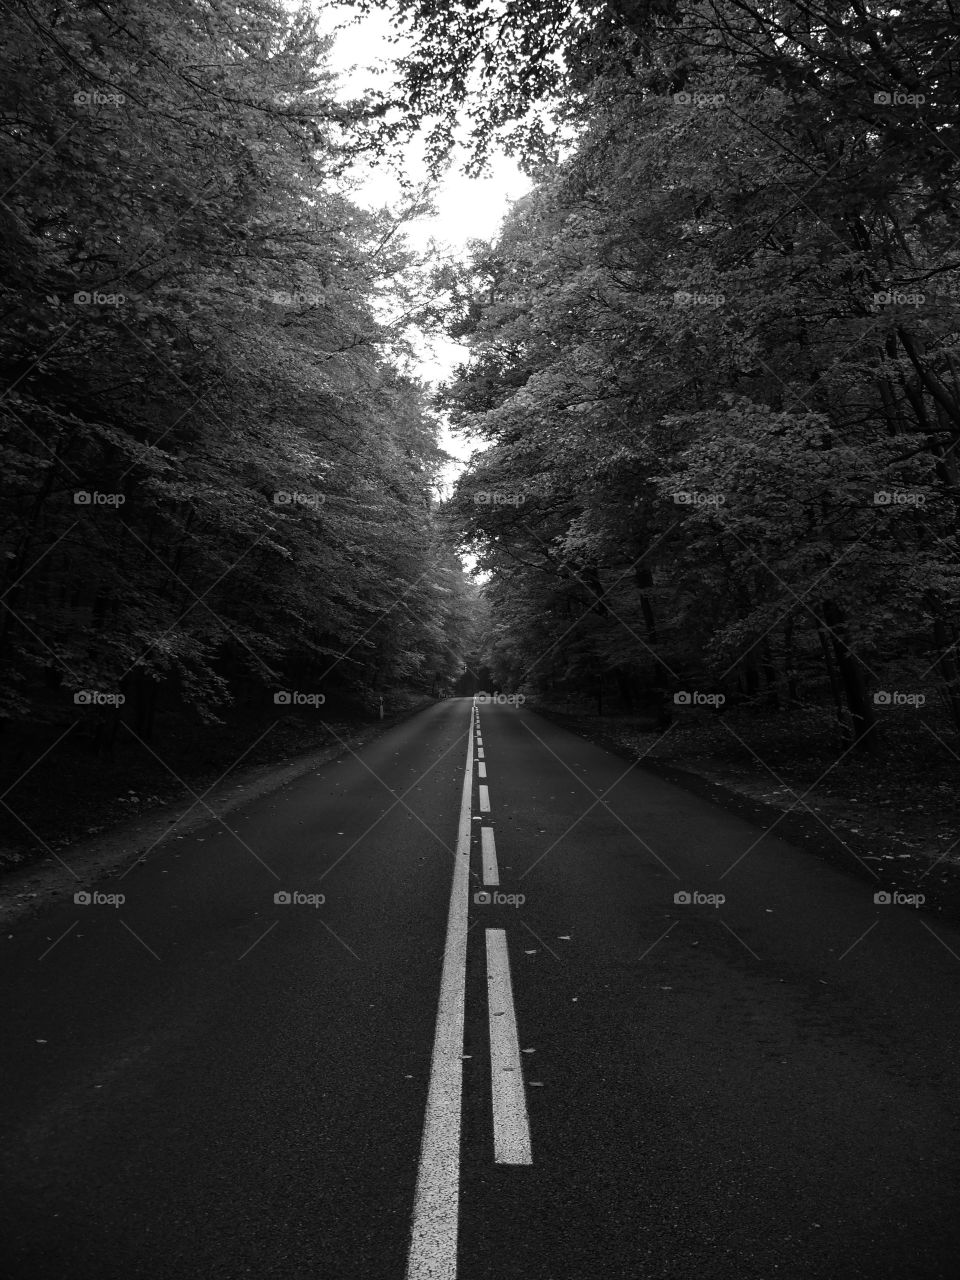 Black and white shot of road amidst trees in Wolin, Poland.